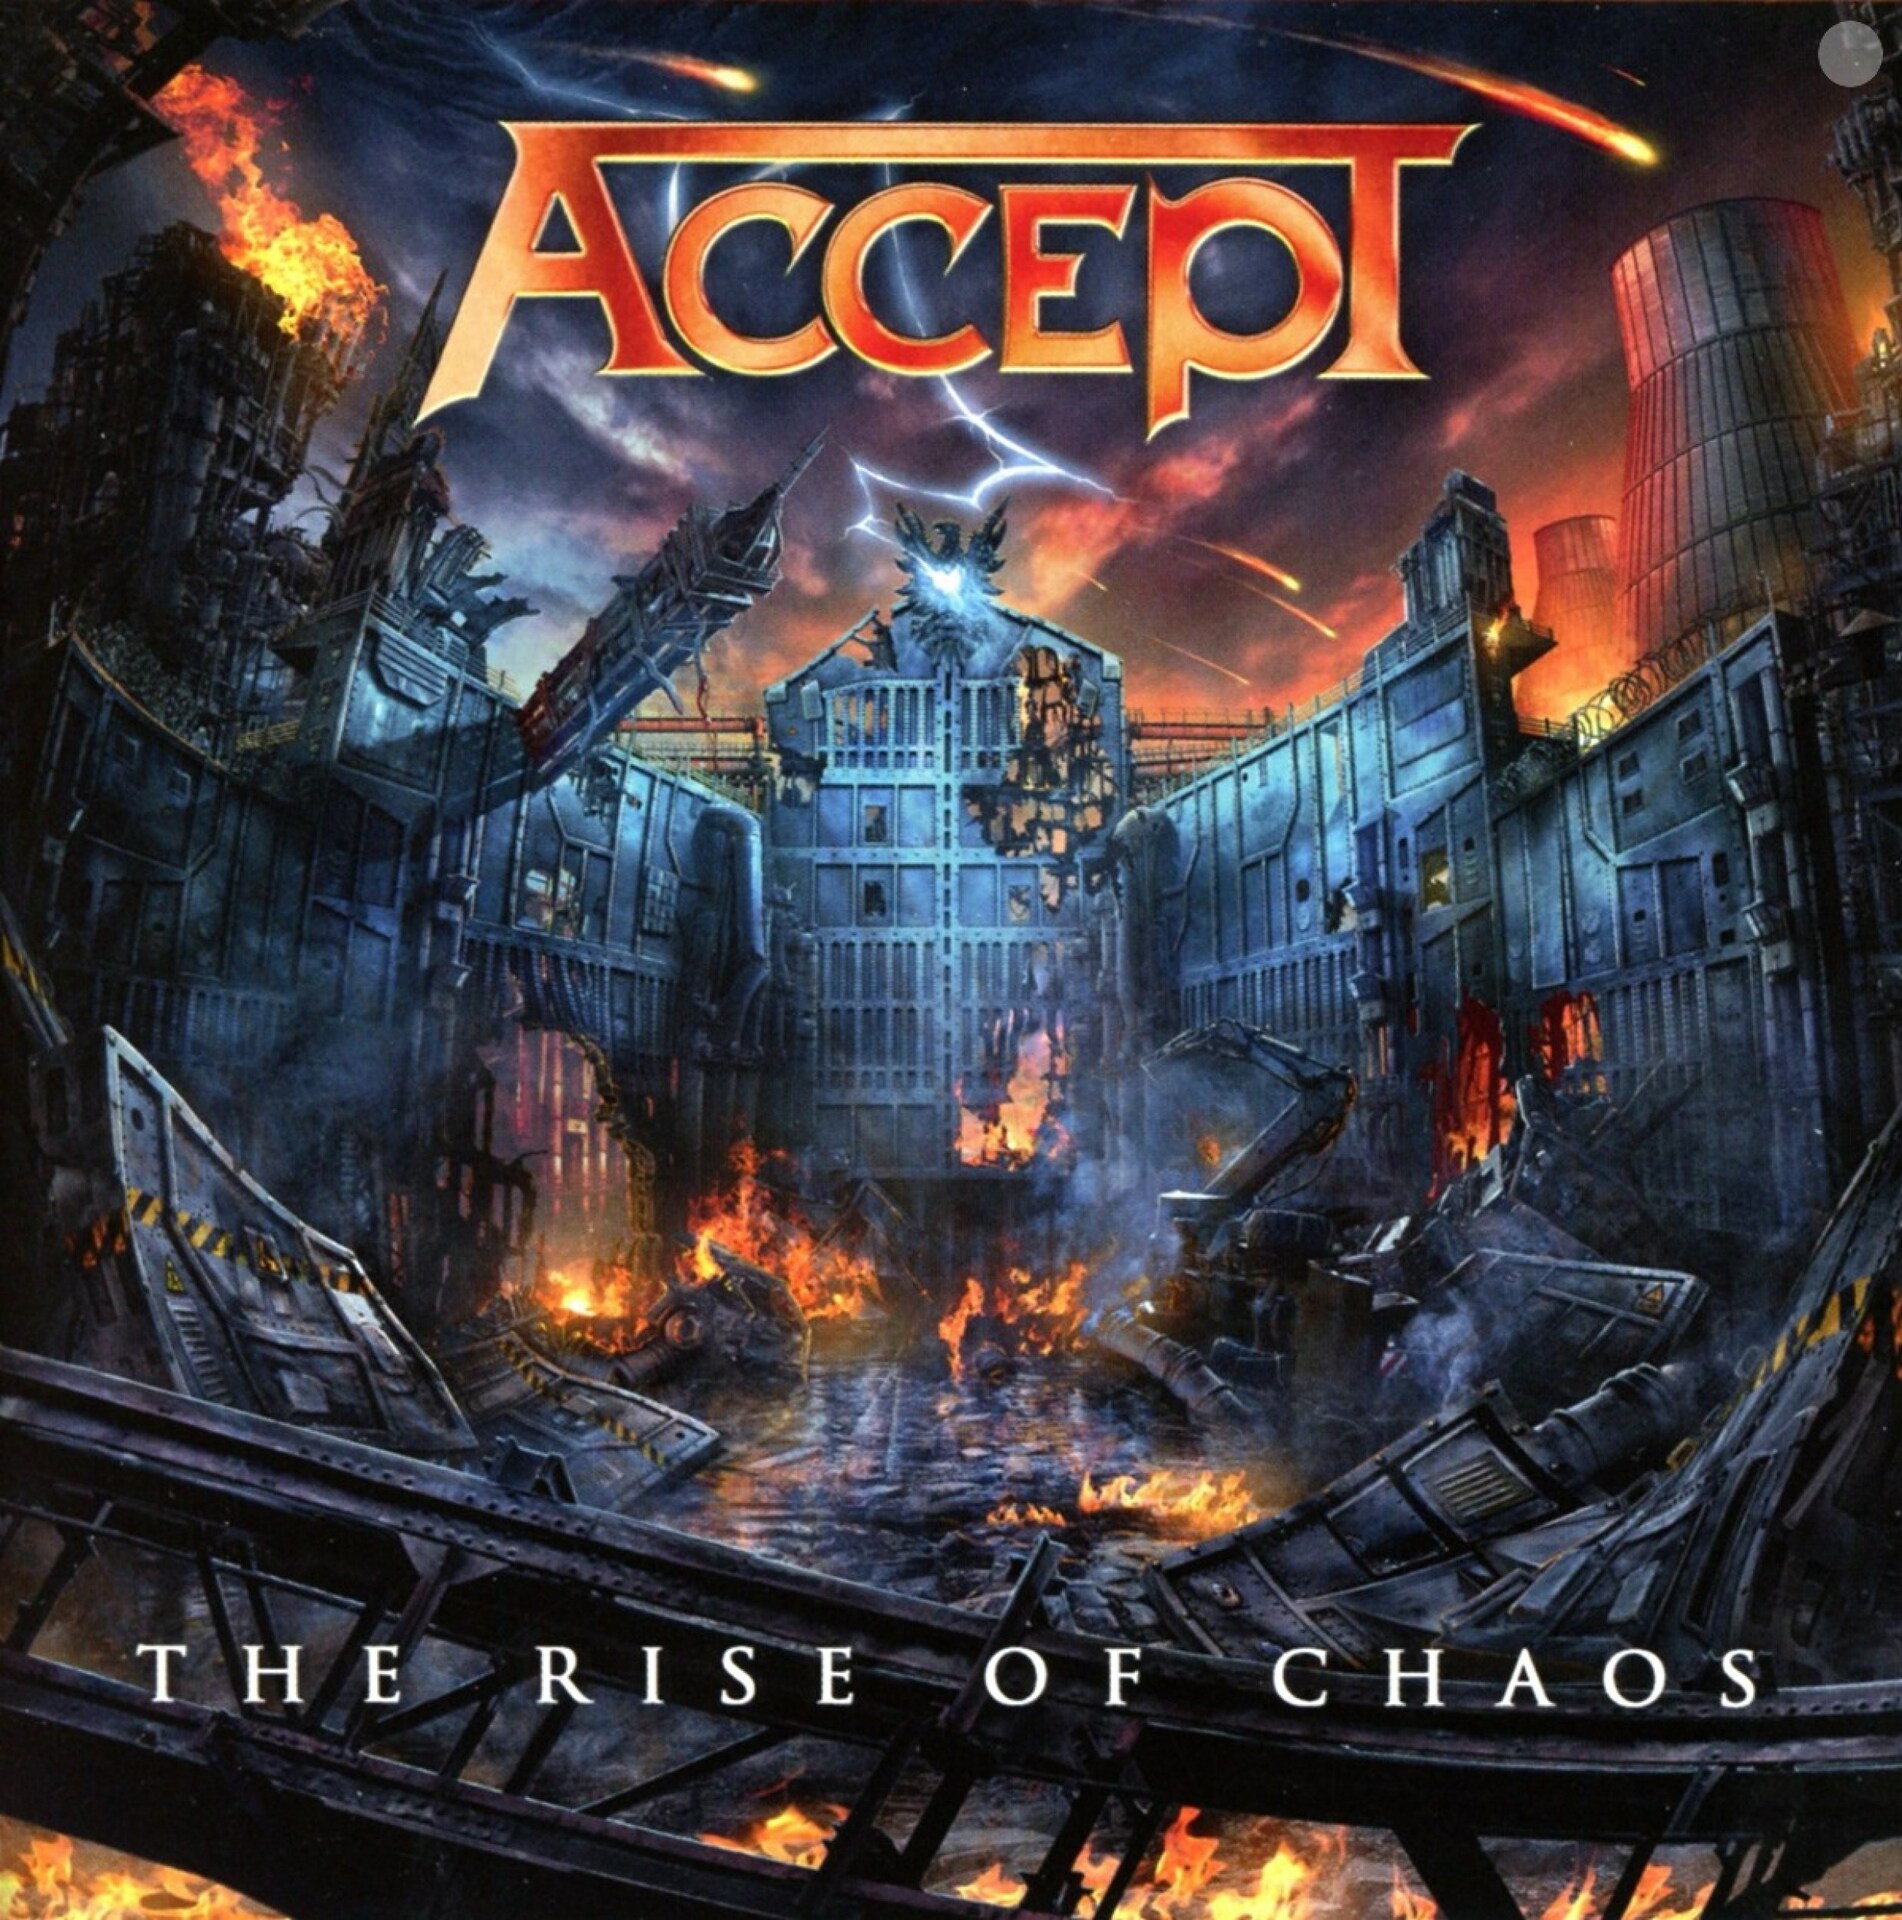 ACCEPT - The rise of chaos (DIGI)